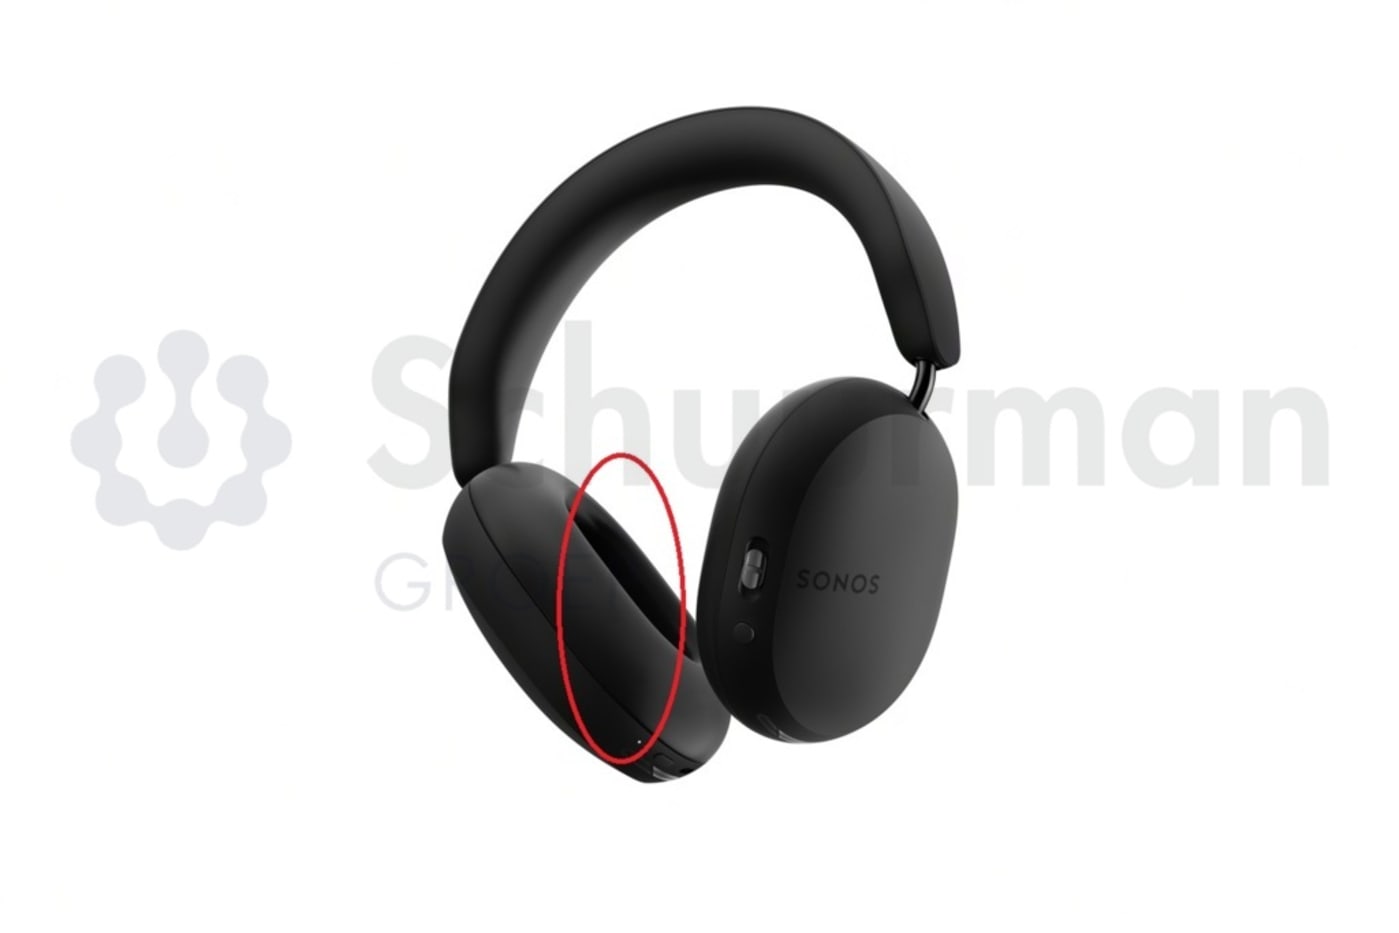 Here's what the long-rumored Sonos wireless headphones will look like